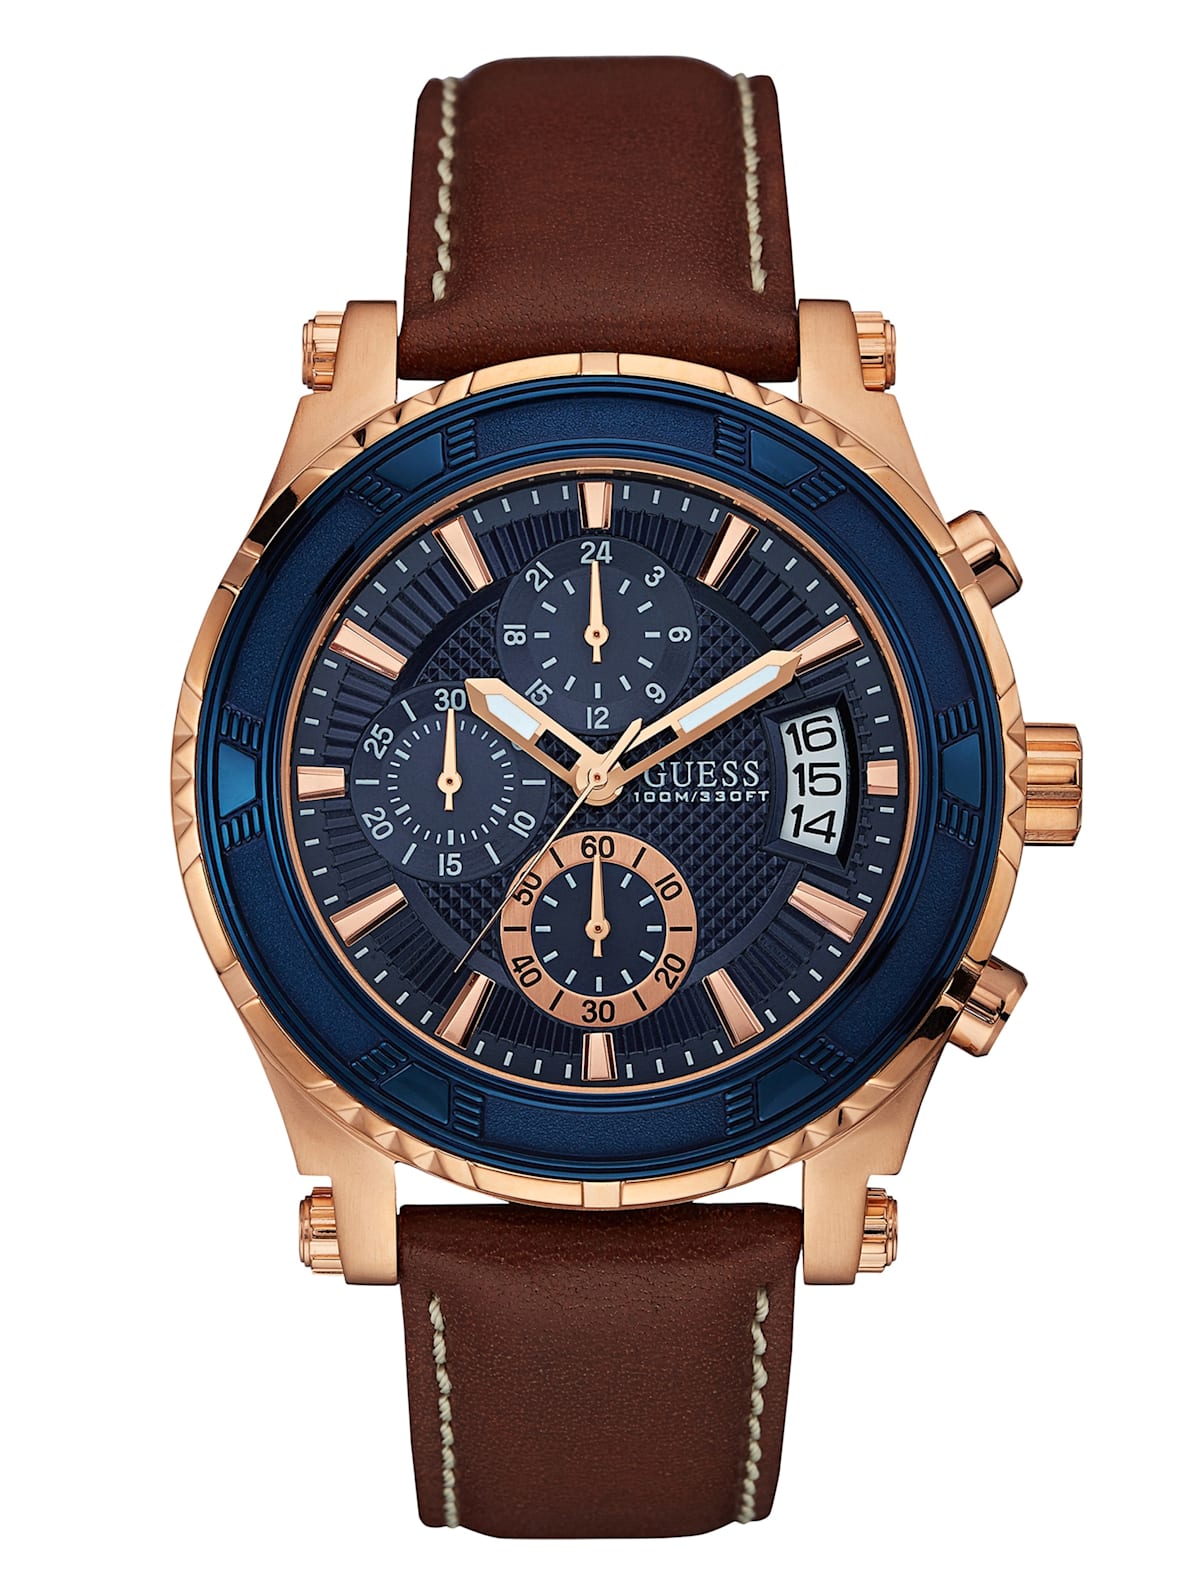 skandale Overbevisende Definere Brown and Rose Gold-Tone Leather Sport Watch | GUESS